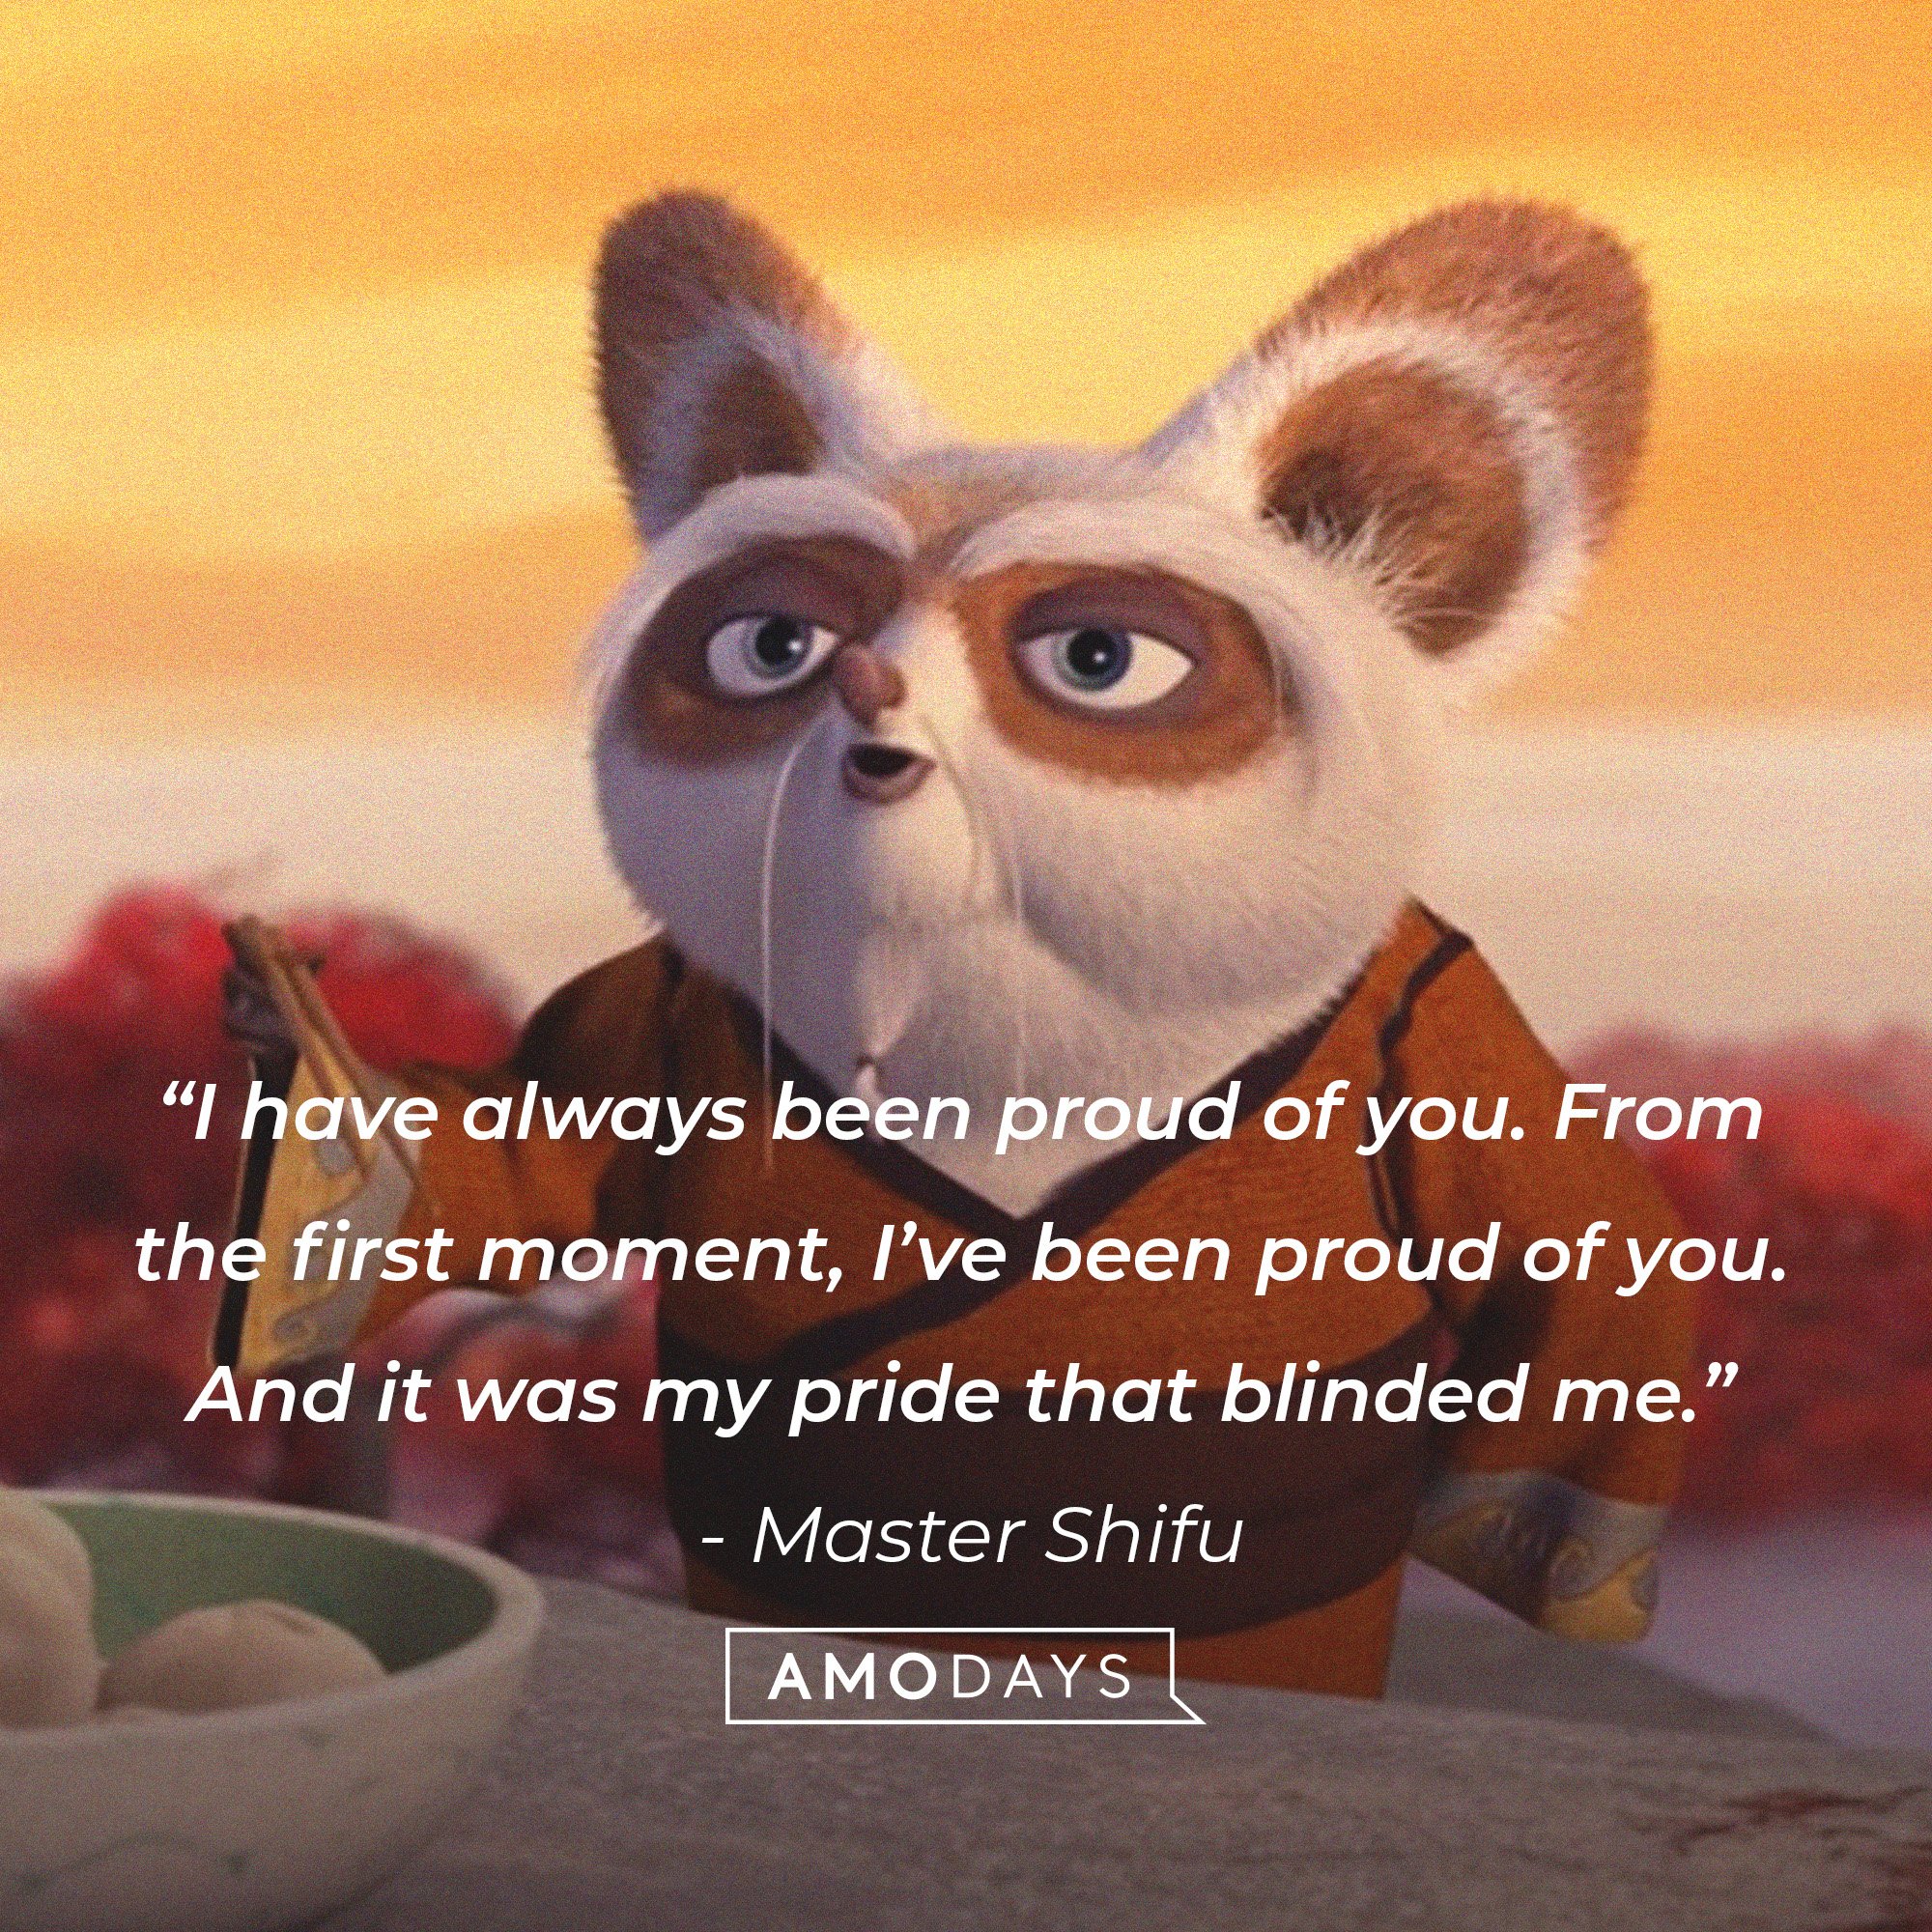  Master Shifu’s quote: “I have always been proud of you. From the first moment, I’ve been proud of you. And it was my pride that blinded me.” | Image: AmoDays